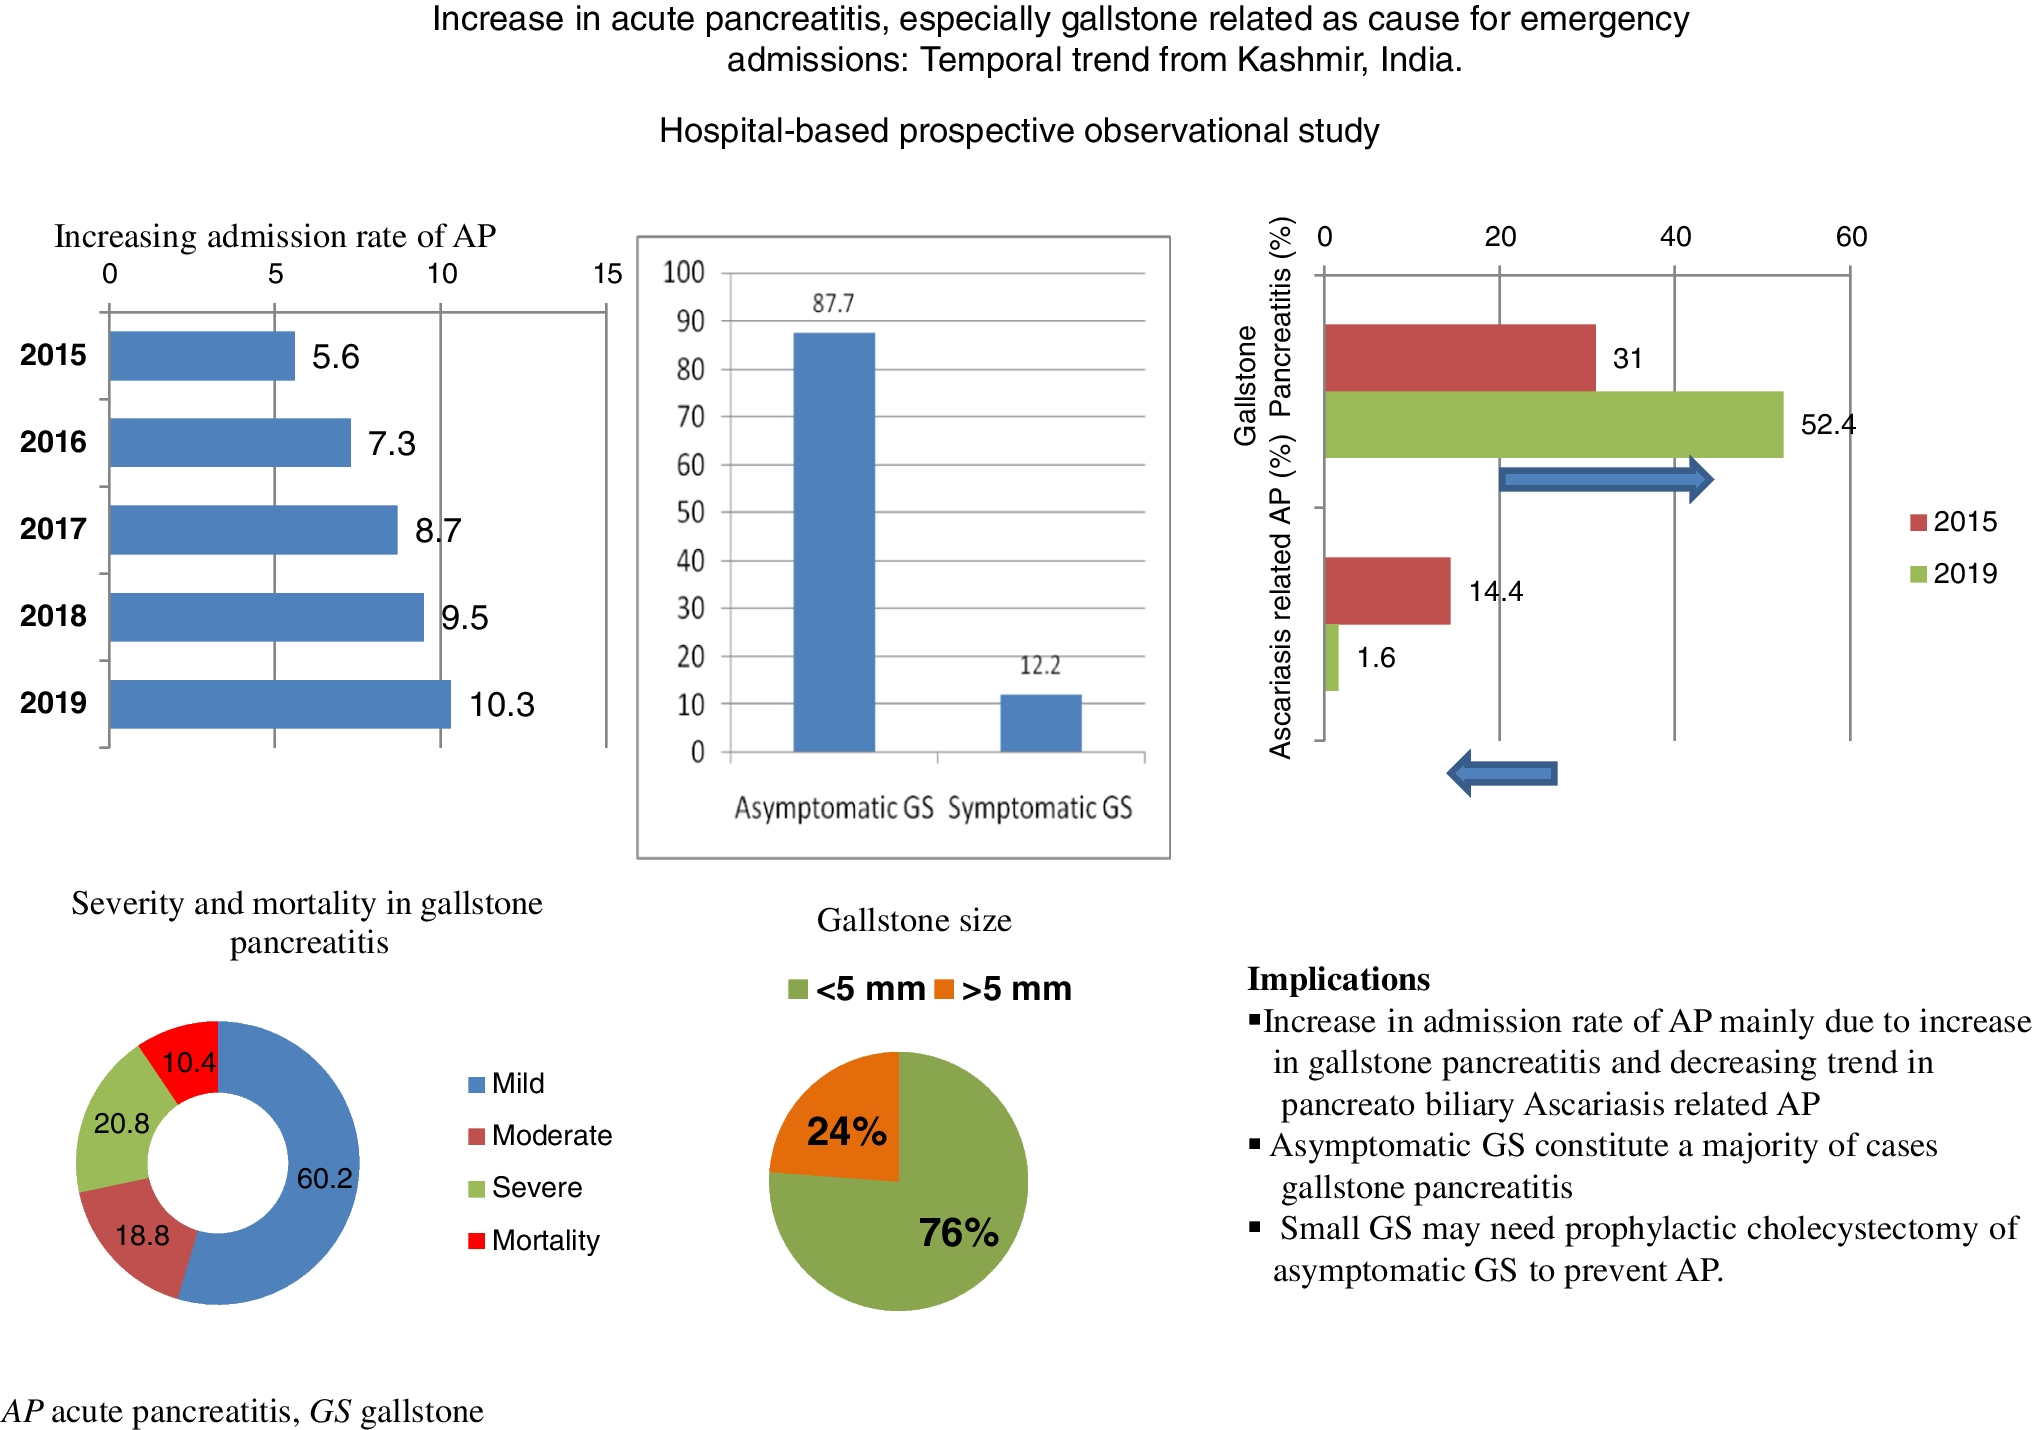 Increase in acute pancreatitis, especially gallstone related, as the cause for emergency admissions: Temporal trend from Kashmir, India